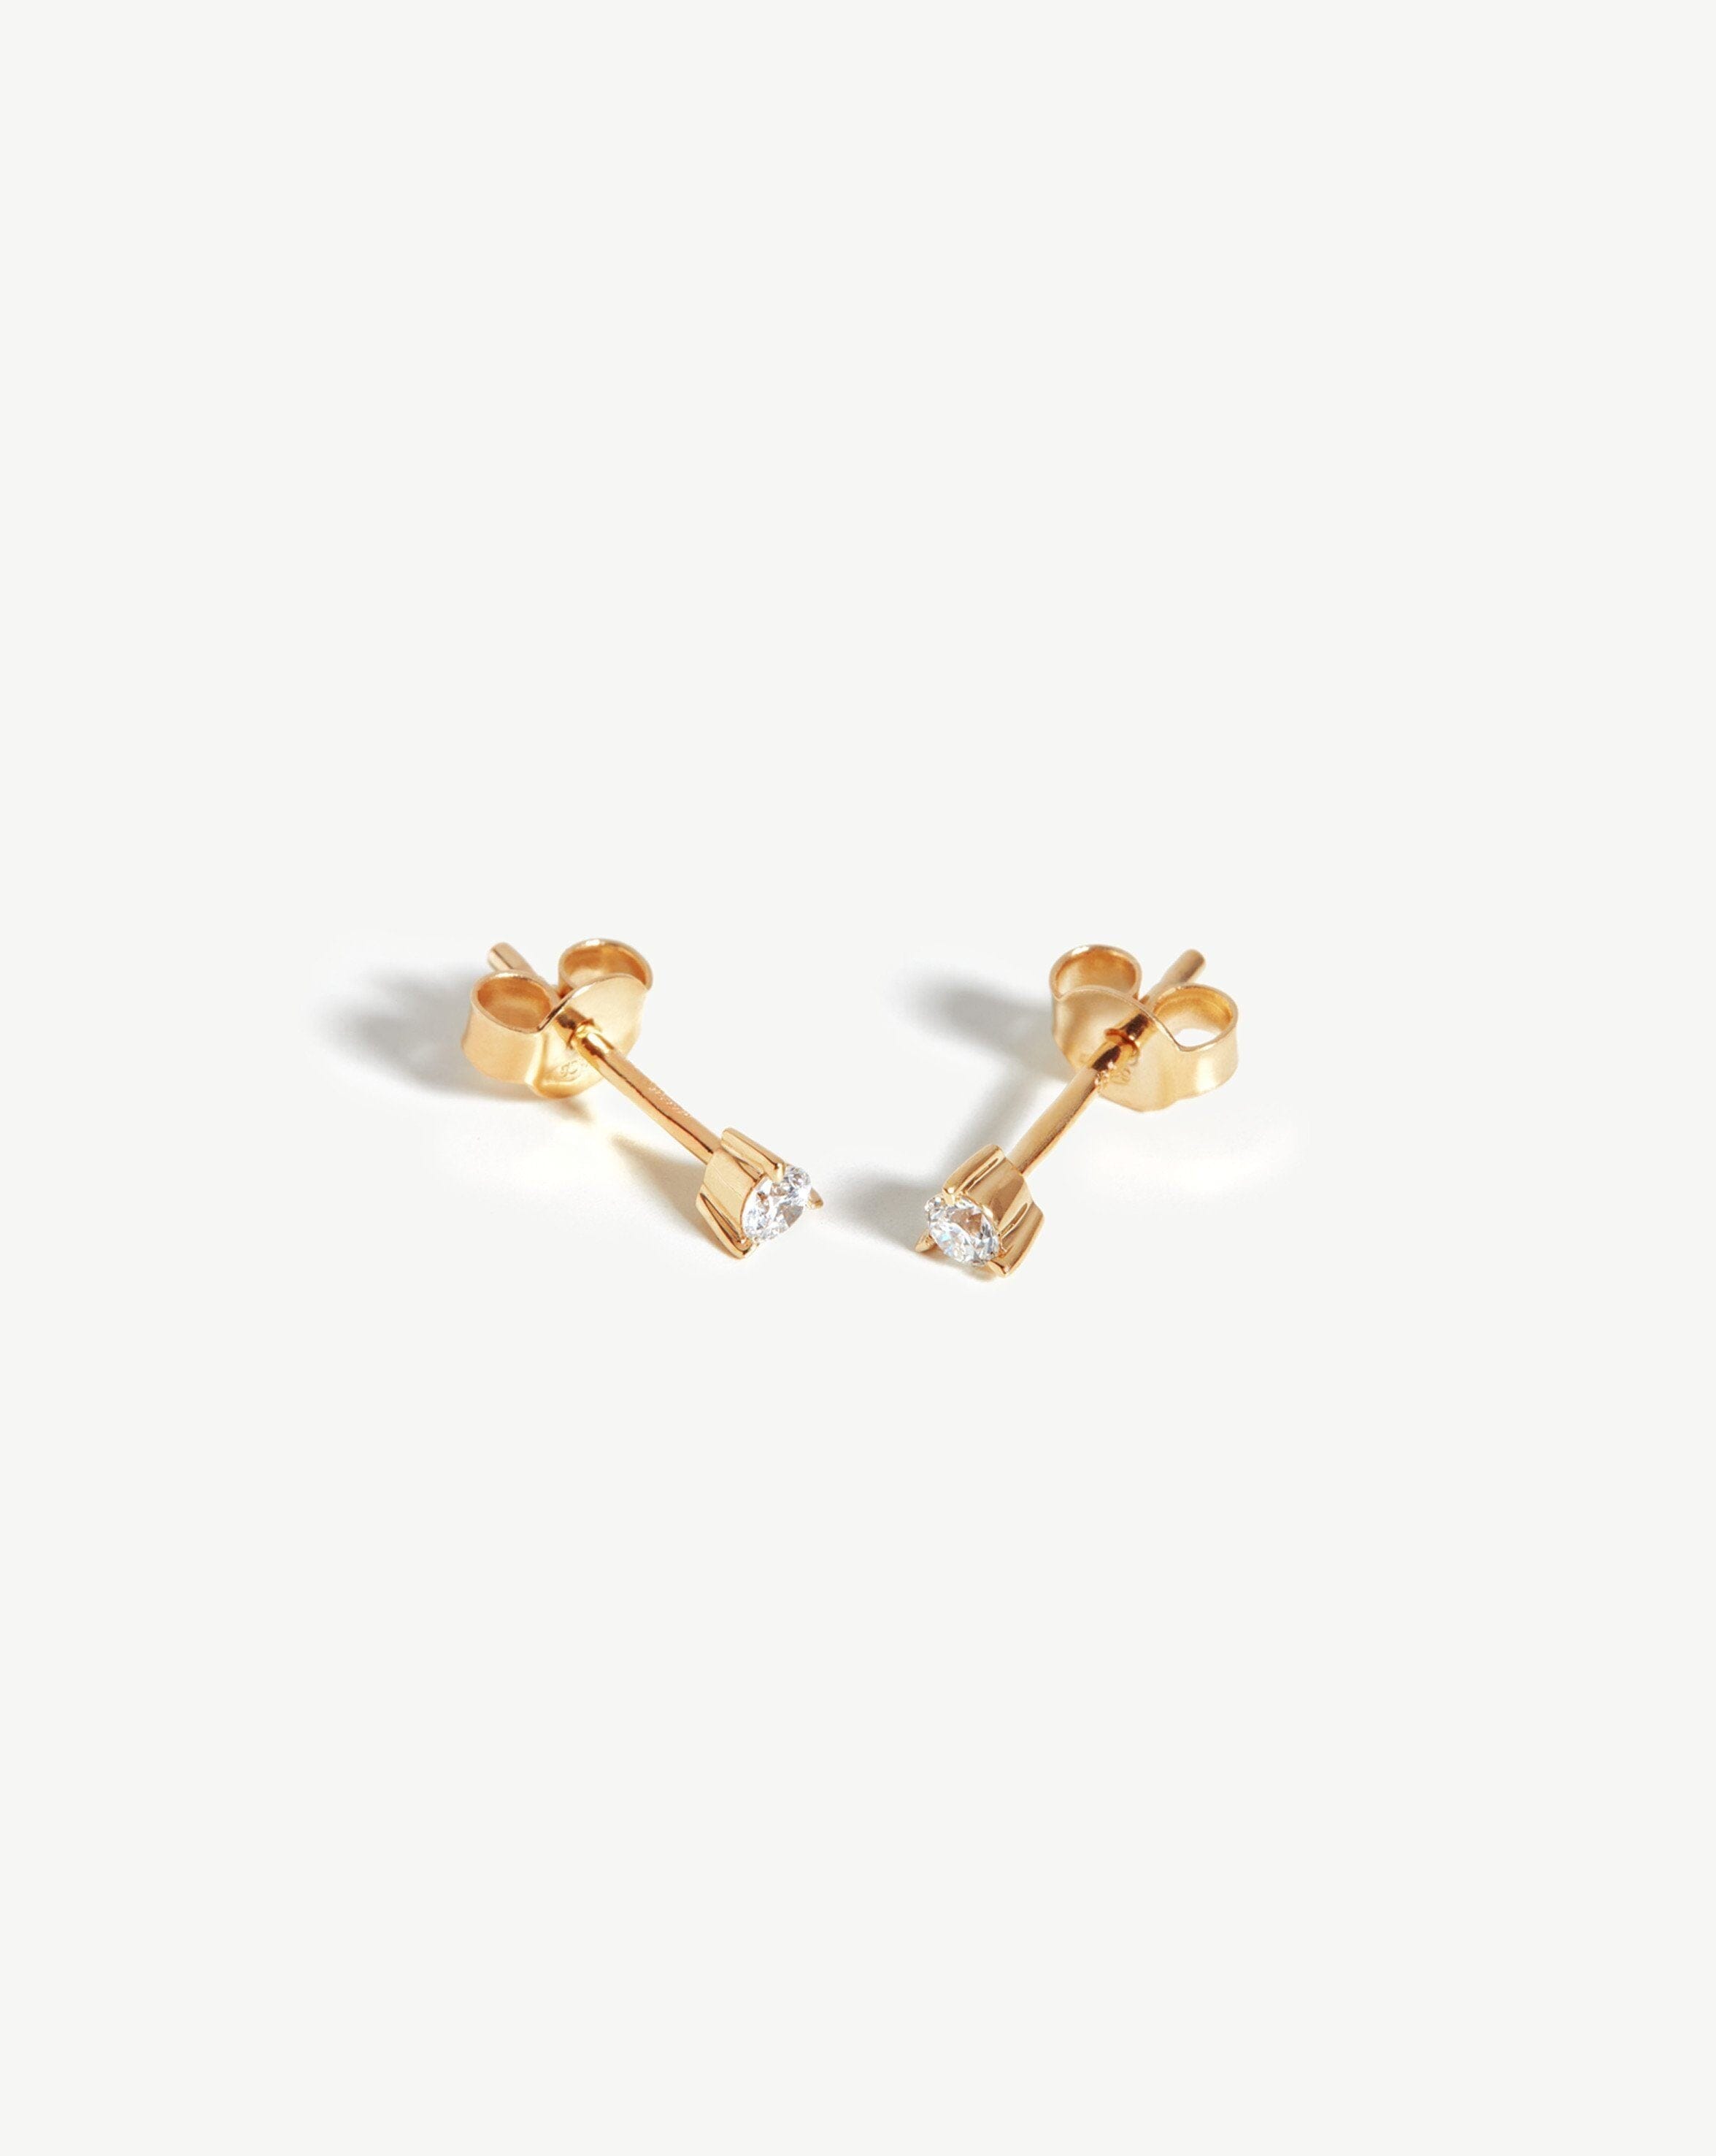 Gold Stud Earrings - Debbie | Ana Luisa | Online Jewelry Store At Prices  You'll Love